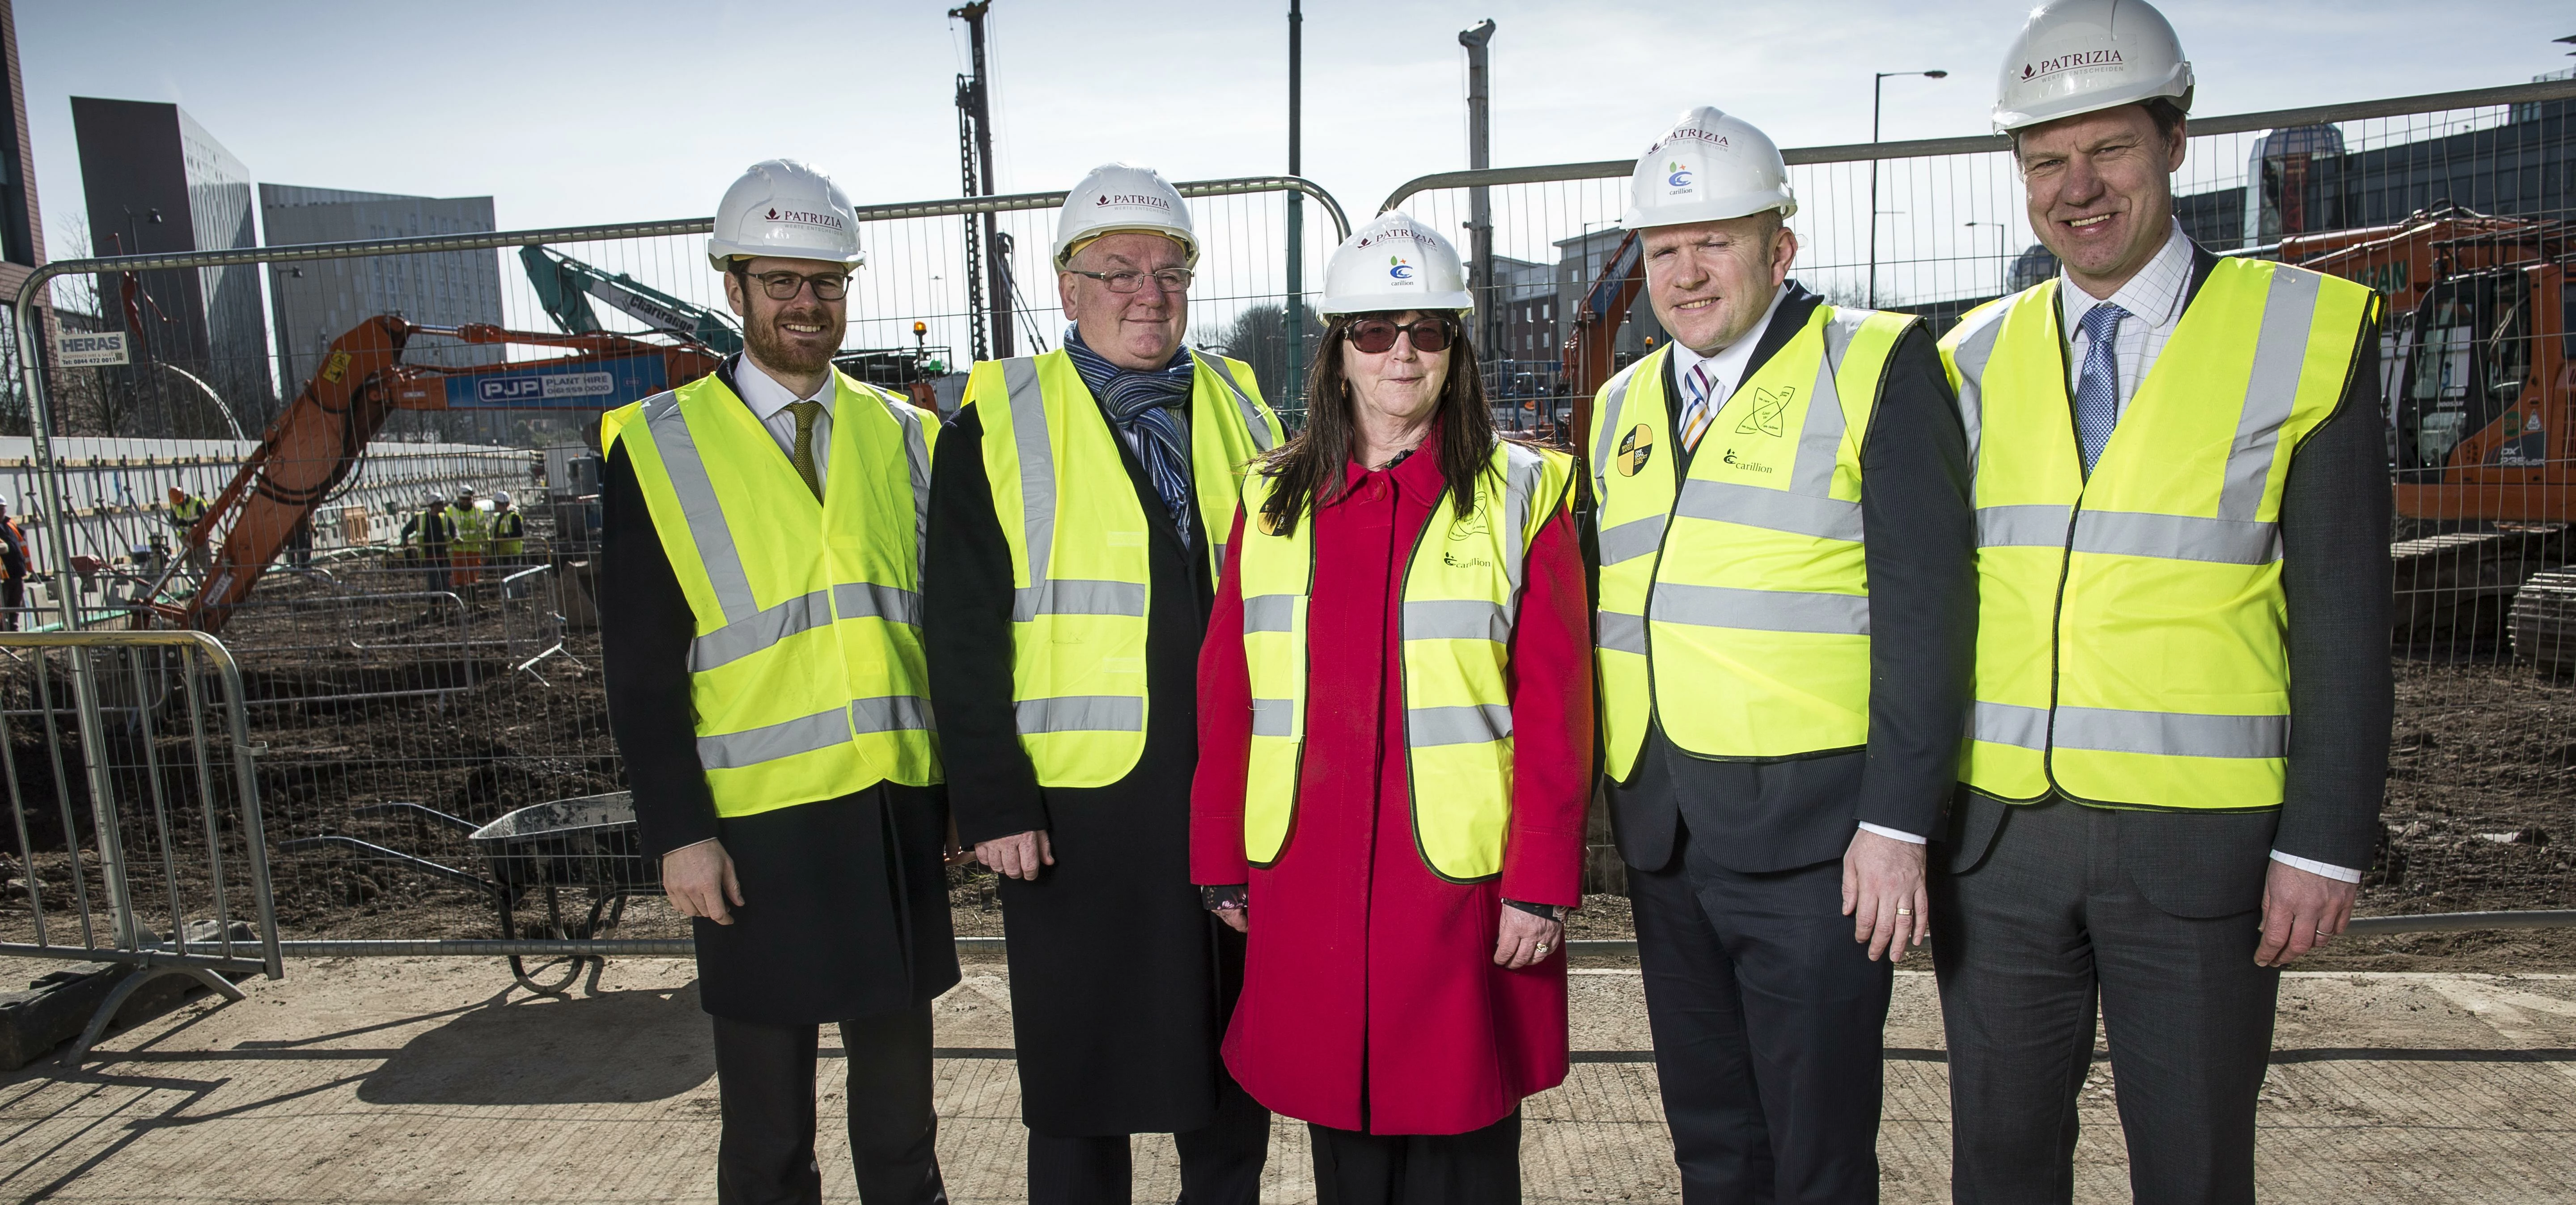 Pictured from left to right: James Muir, Councillor Kieran Quinn, Councillor Susan Quinn (Lead), Pad